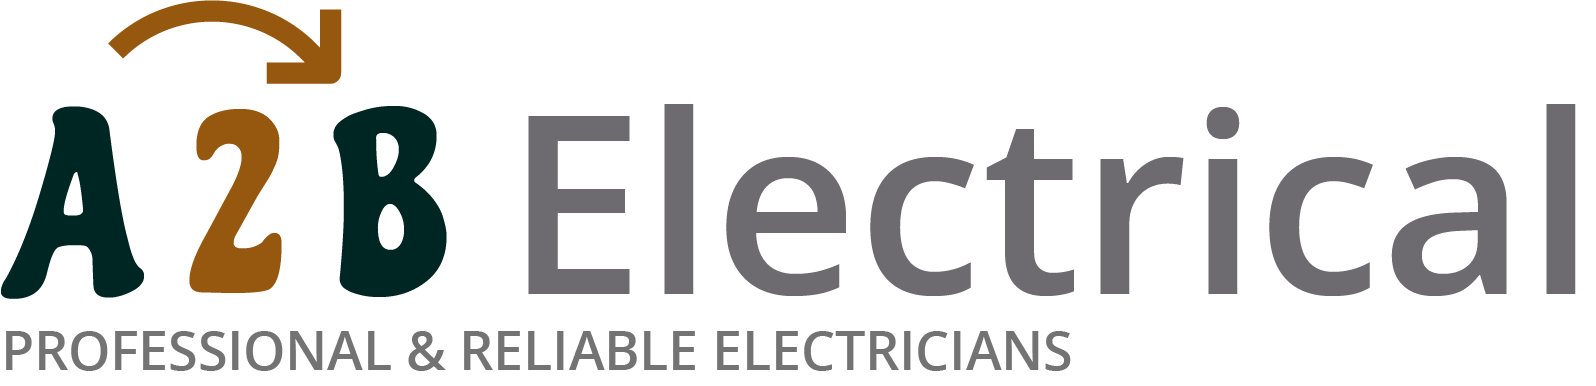 If you have electrical wiring problems in Streatham, we can provide an electrician to have a look for you. 